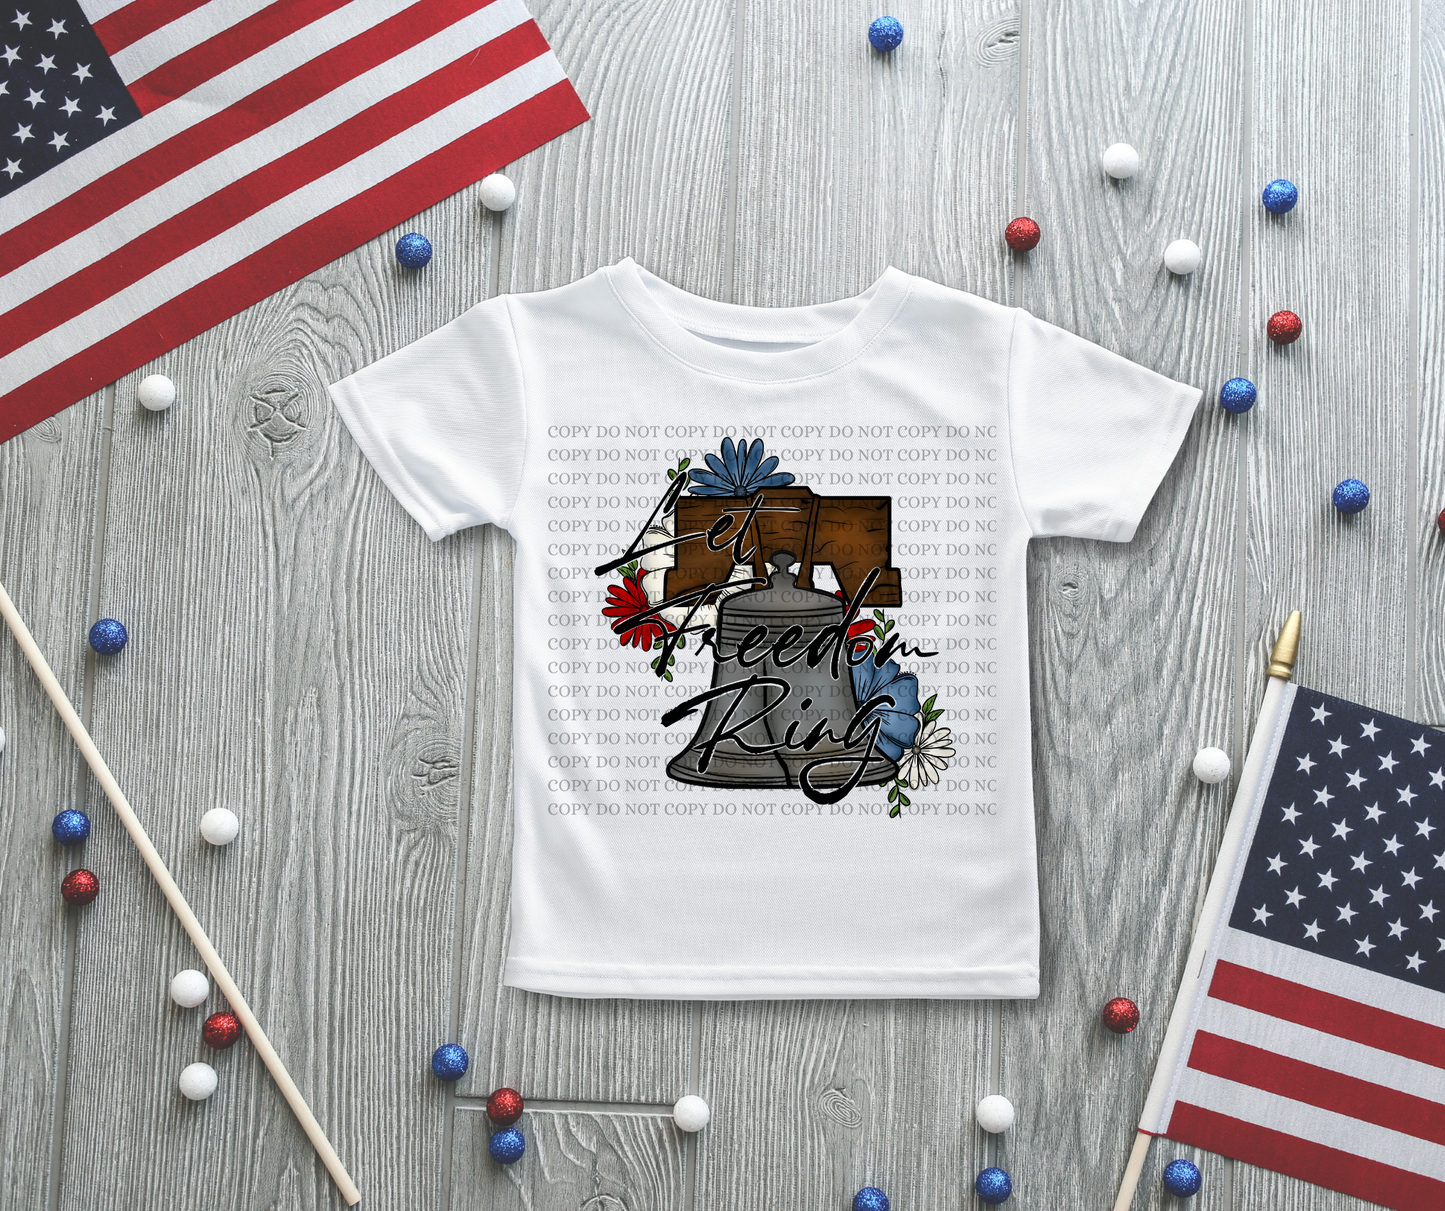 Let freedom ring kids shirt with liberty bell - Mayan Sub Shop